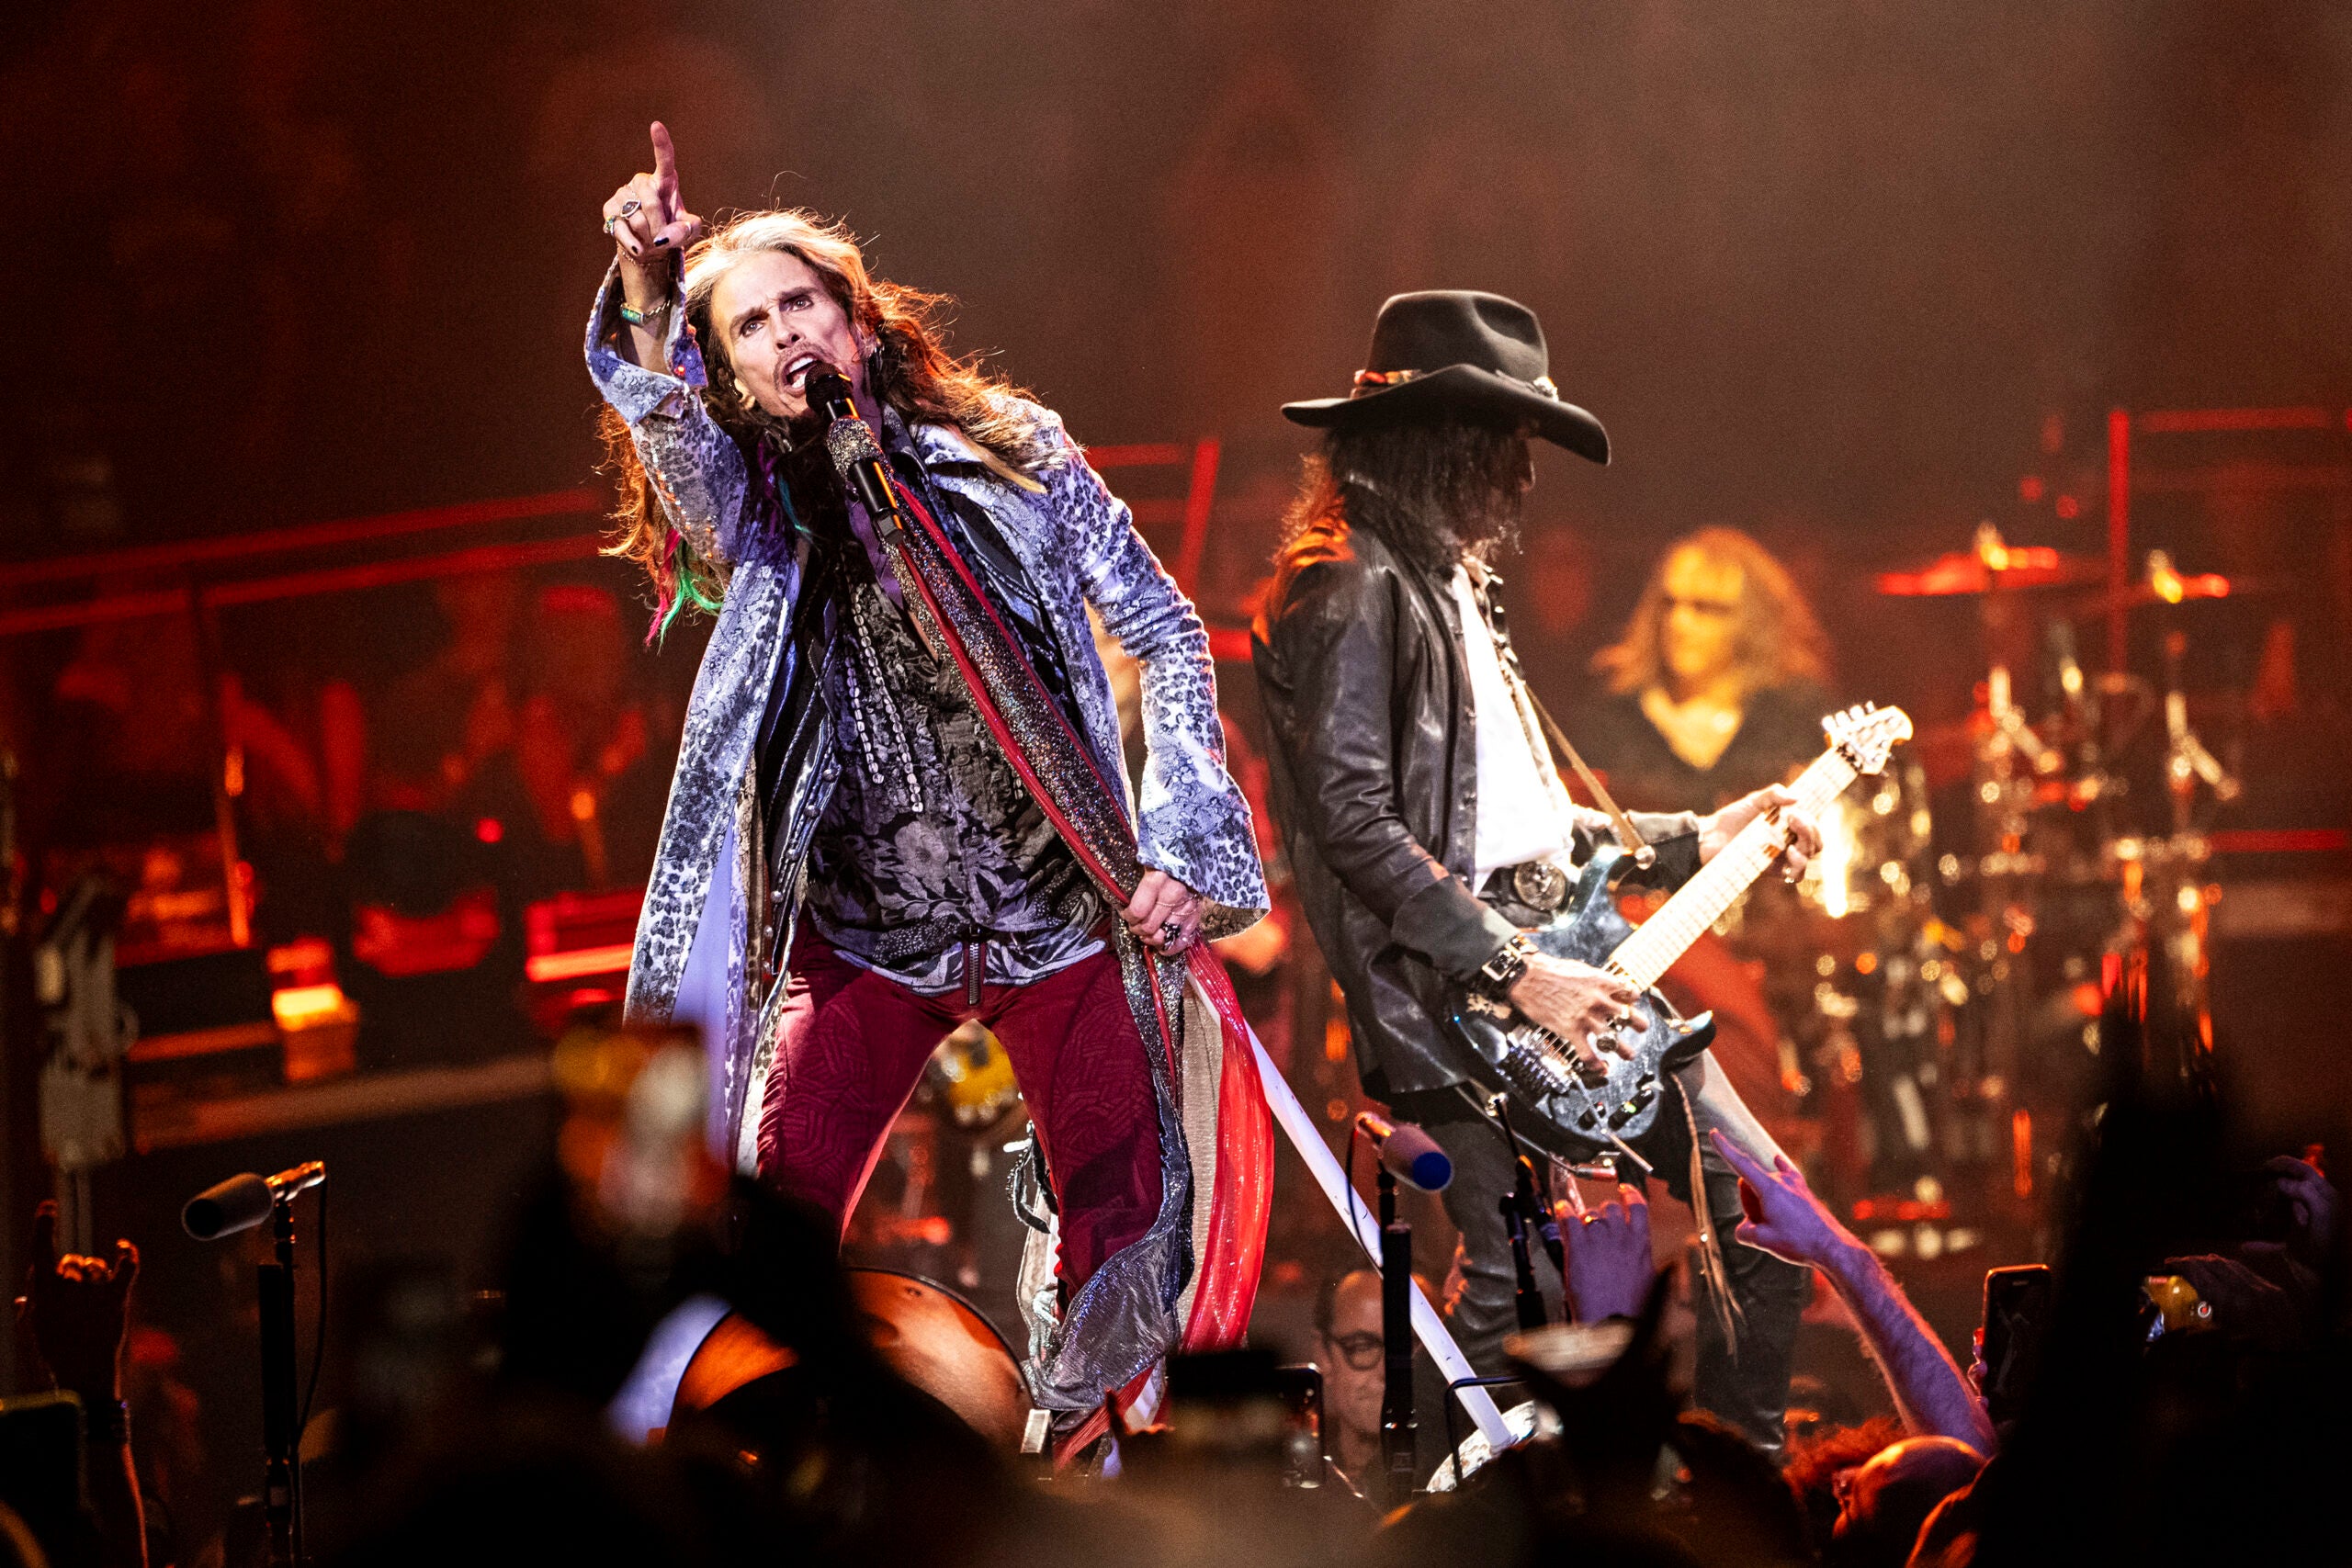 Steven Tyler and Joe Perry of Aerosmith perform on stage.